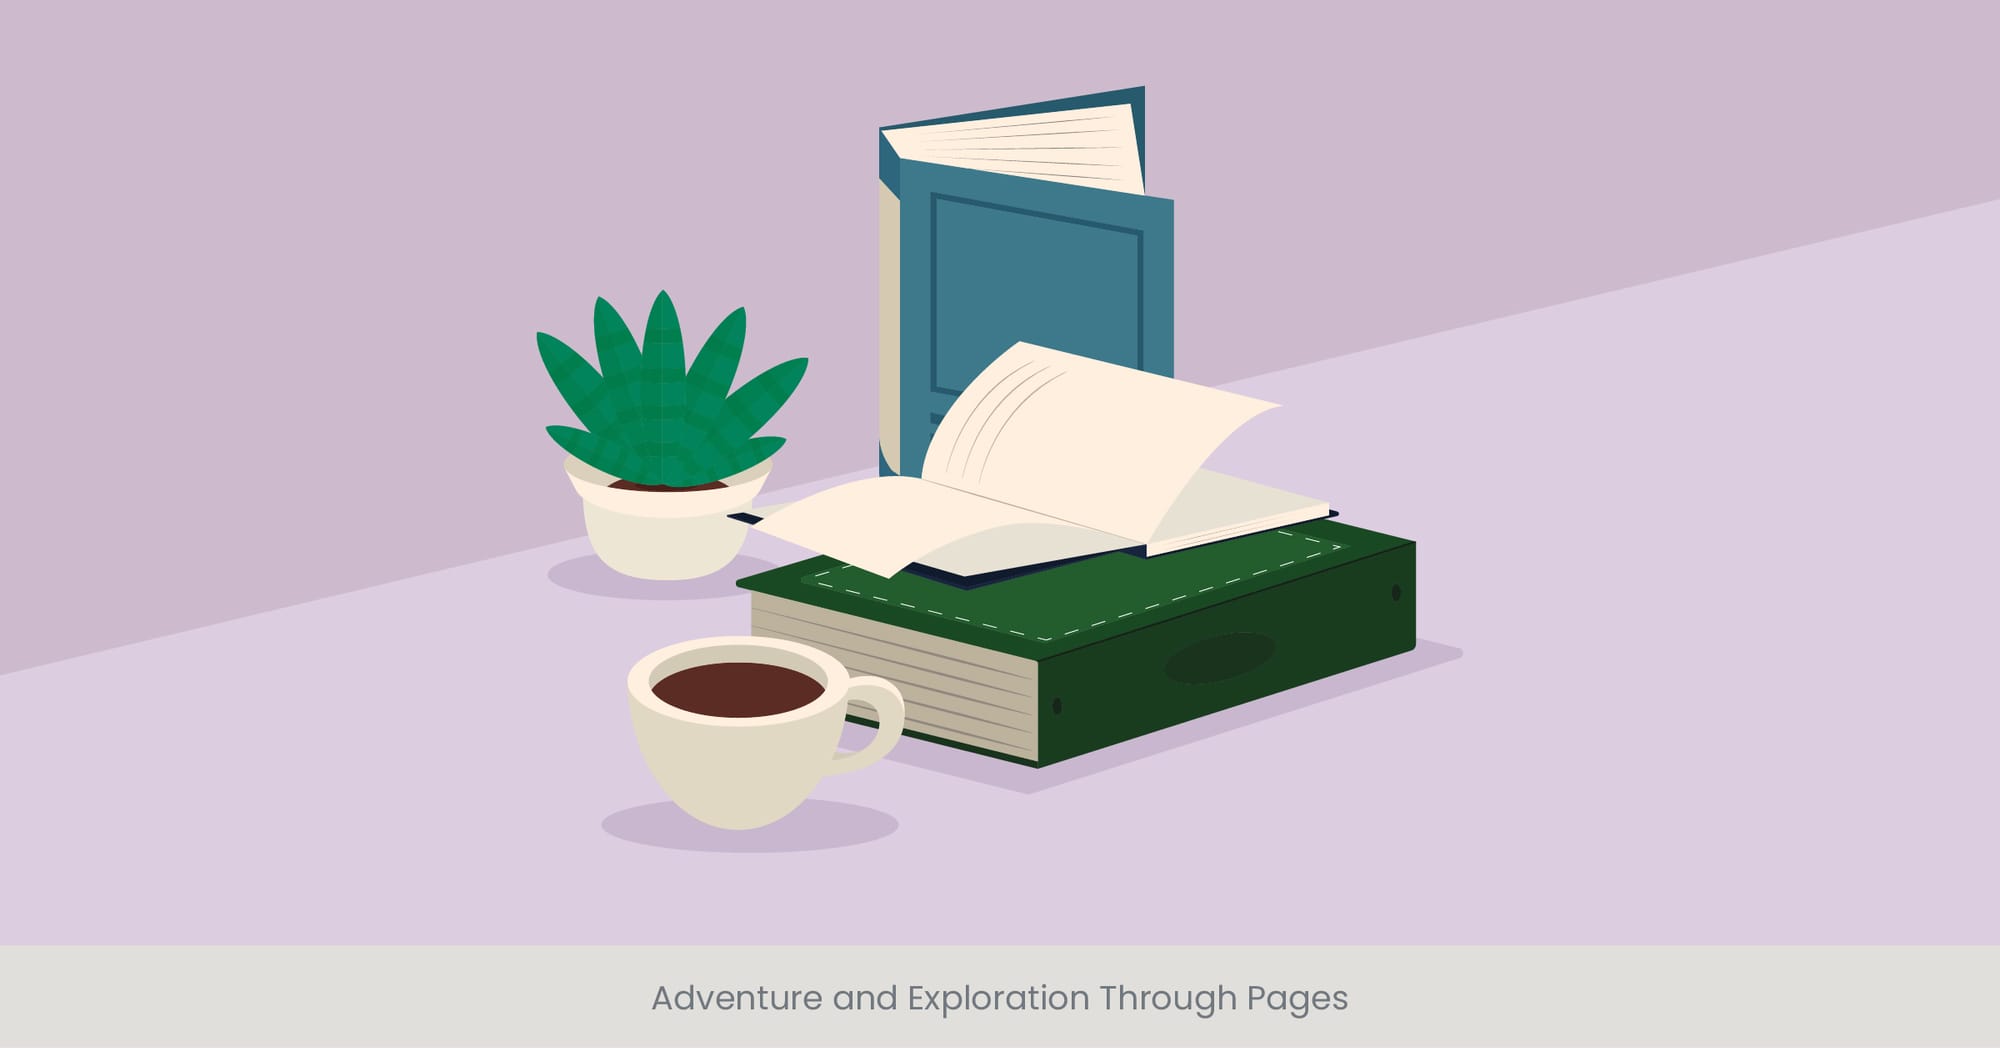 Adventure and Exploration Through Pages